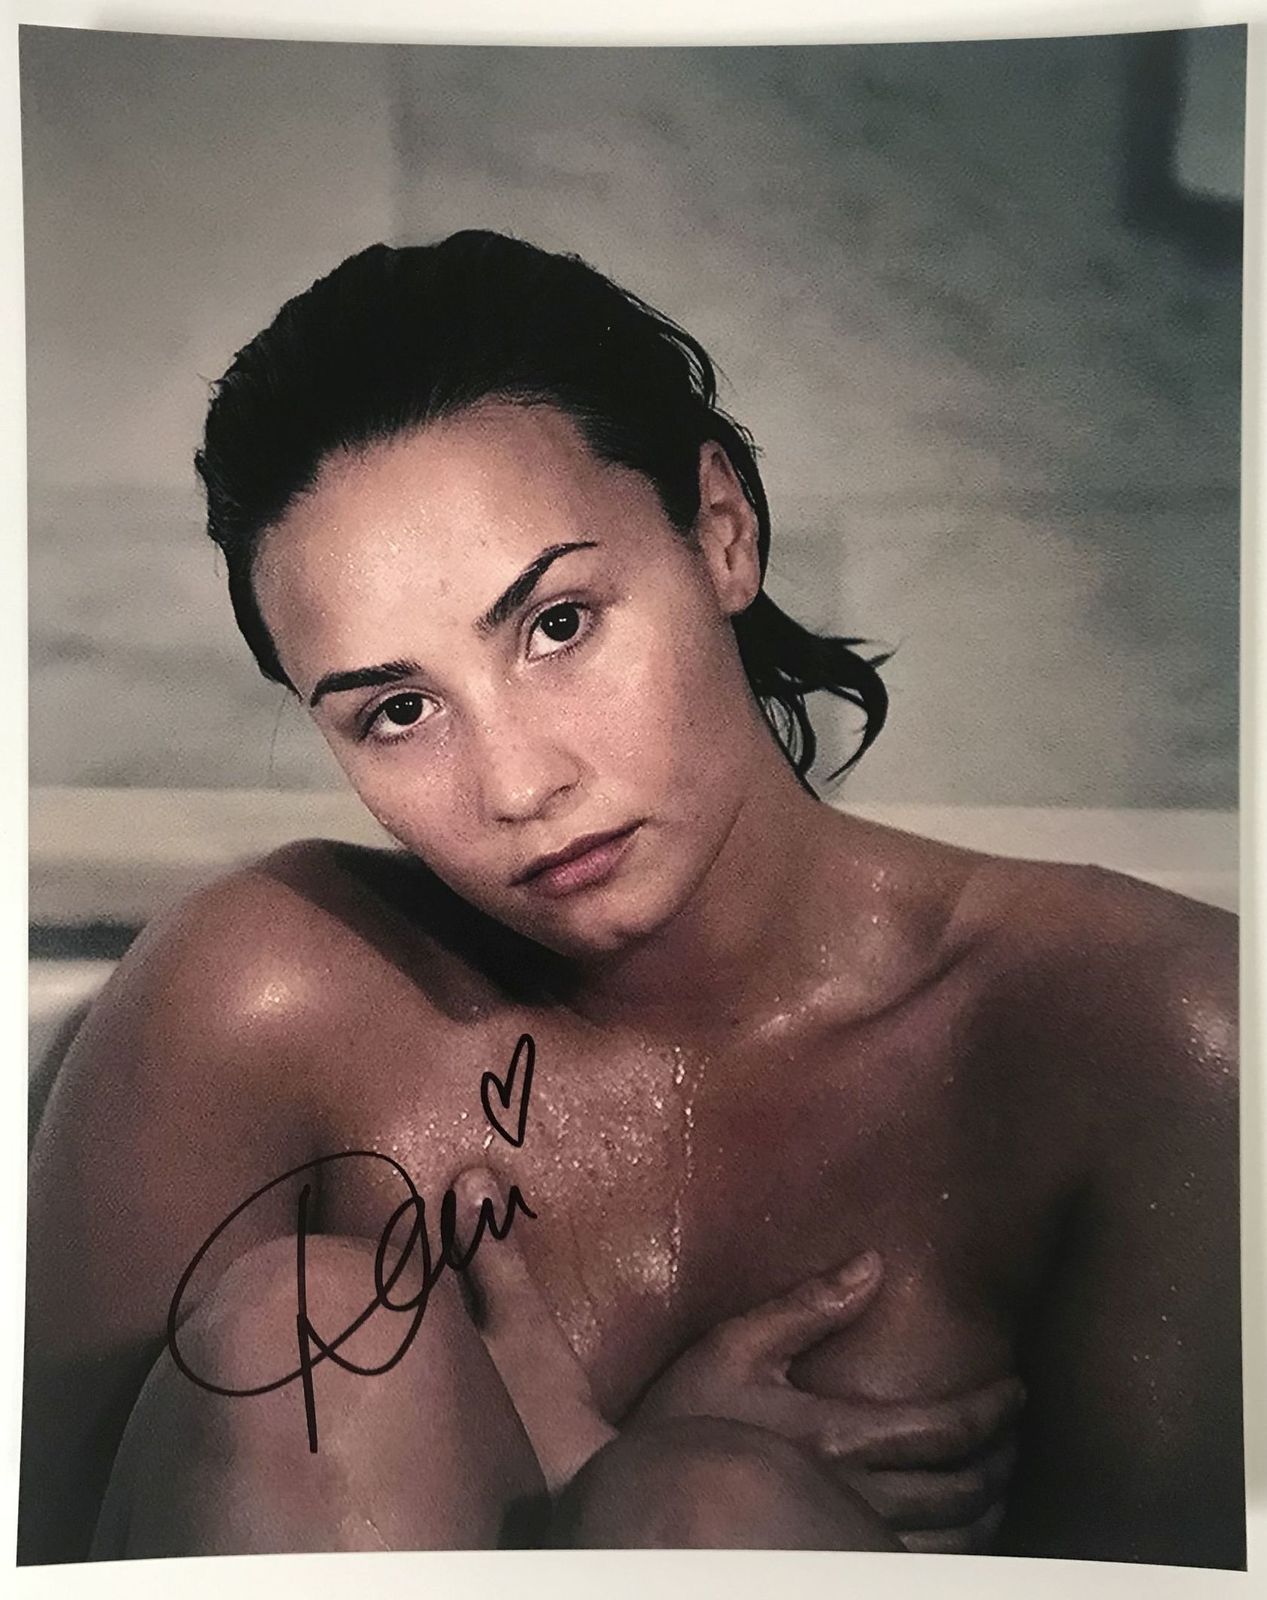 Primary image for Demi Lovato Signed Autographed Glossy 8x10 Photo